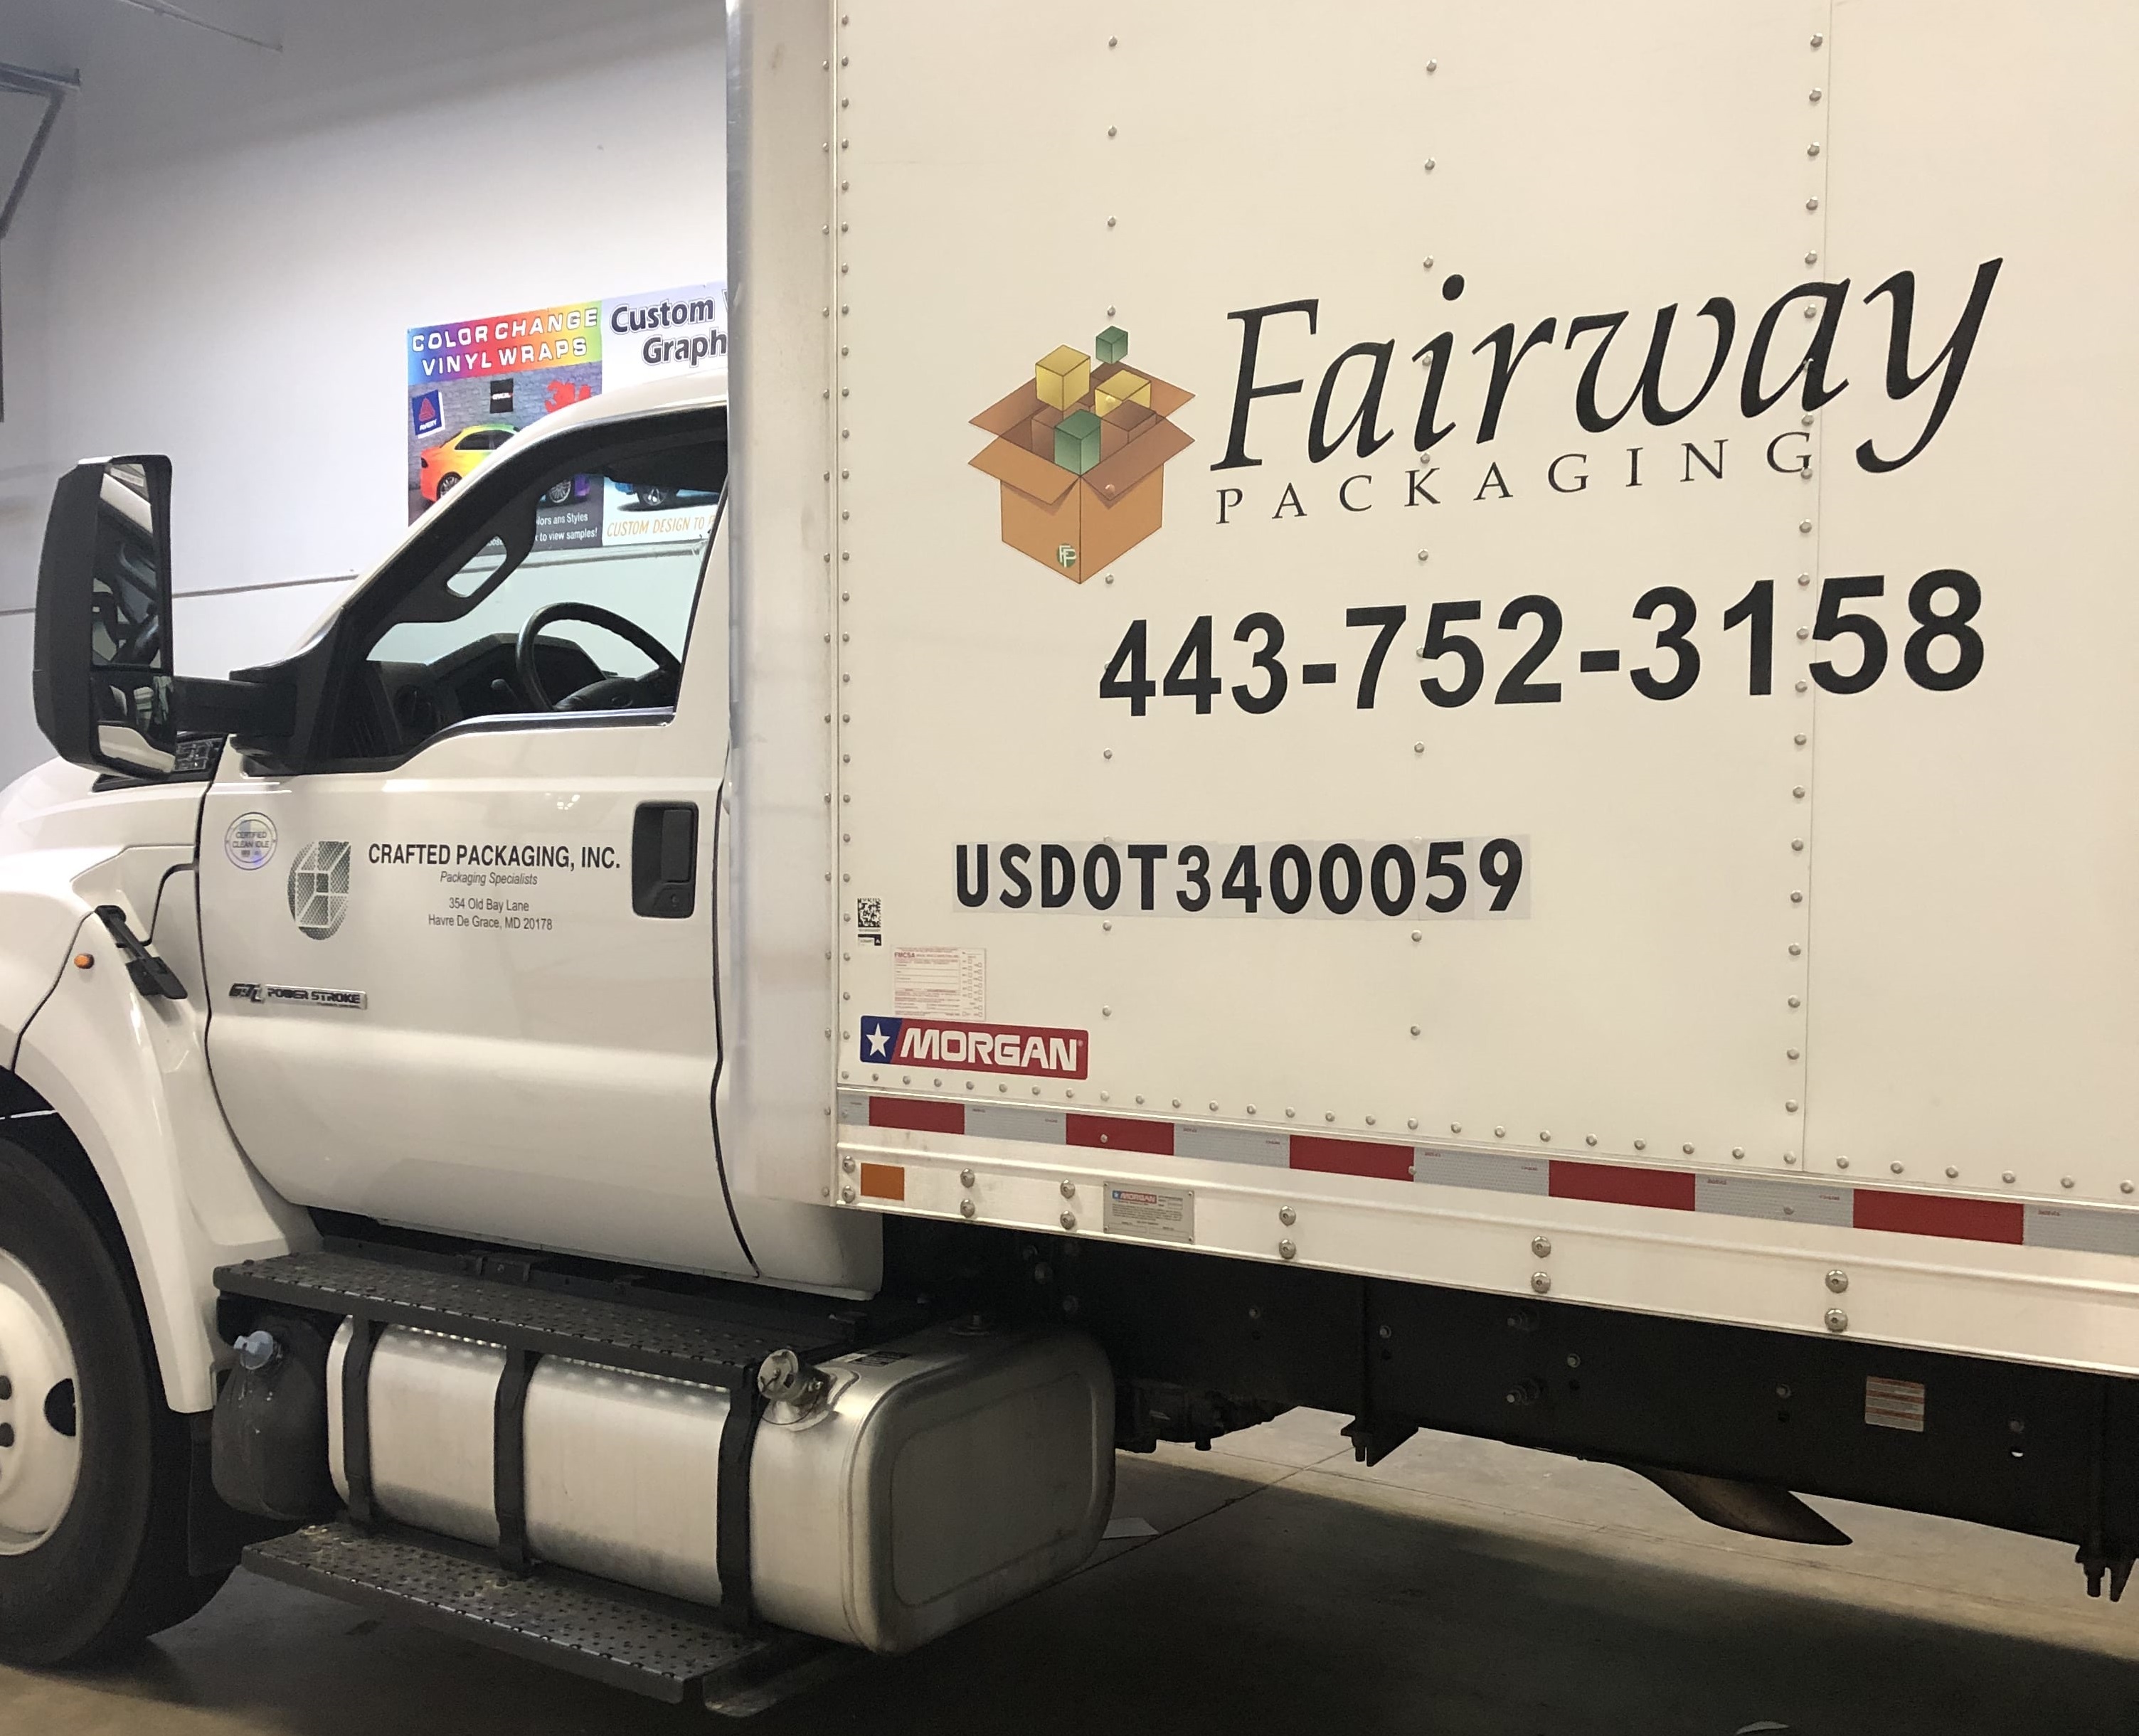 Truck Wraps & Graphics for Fairway Packaging - Baltimore Signs and Graphics